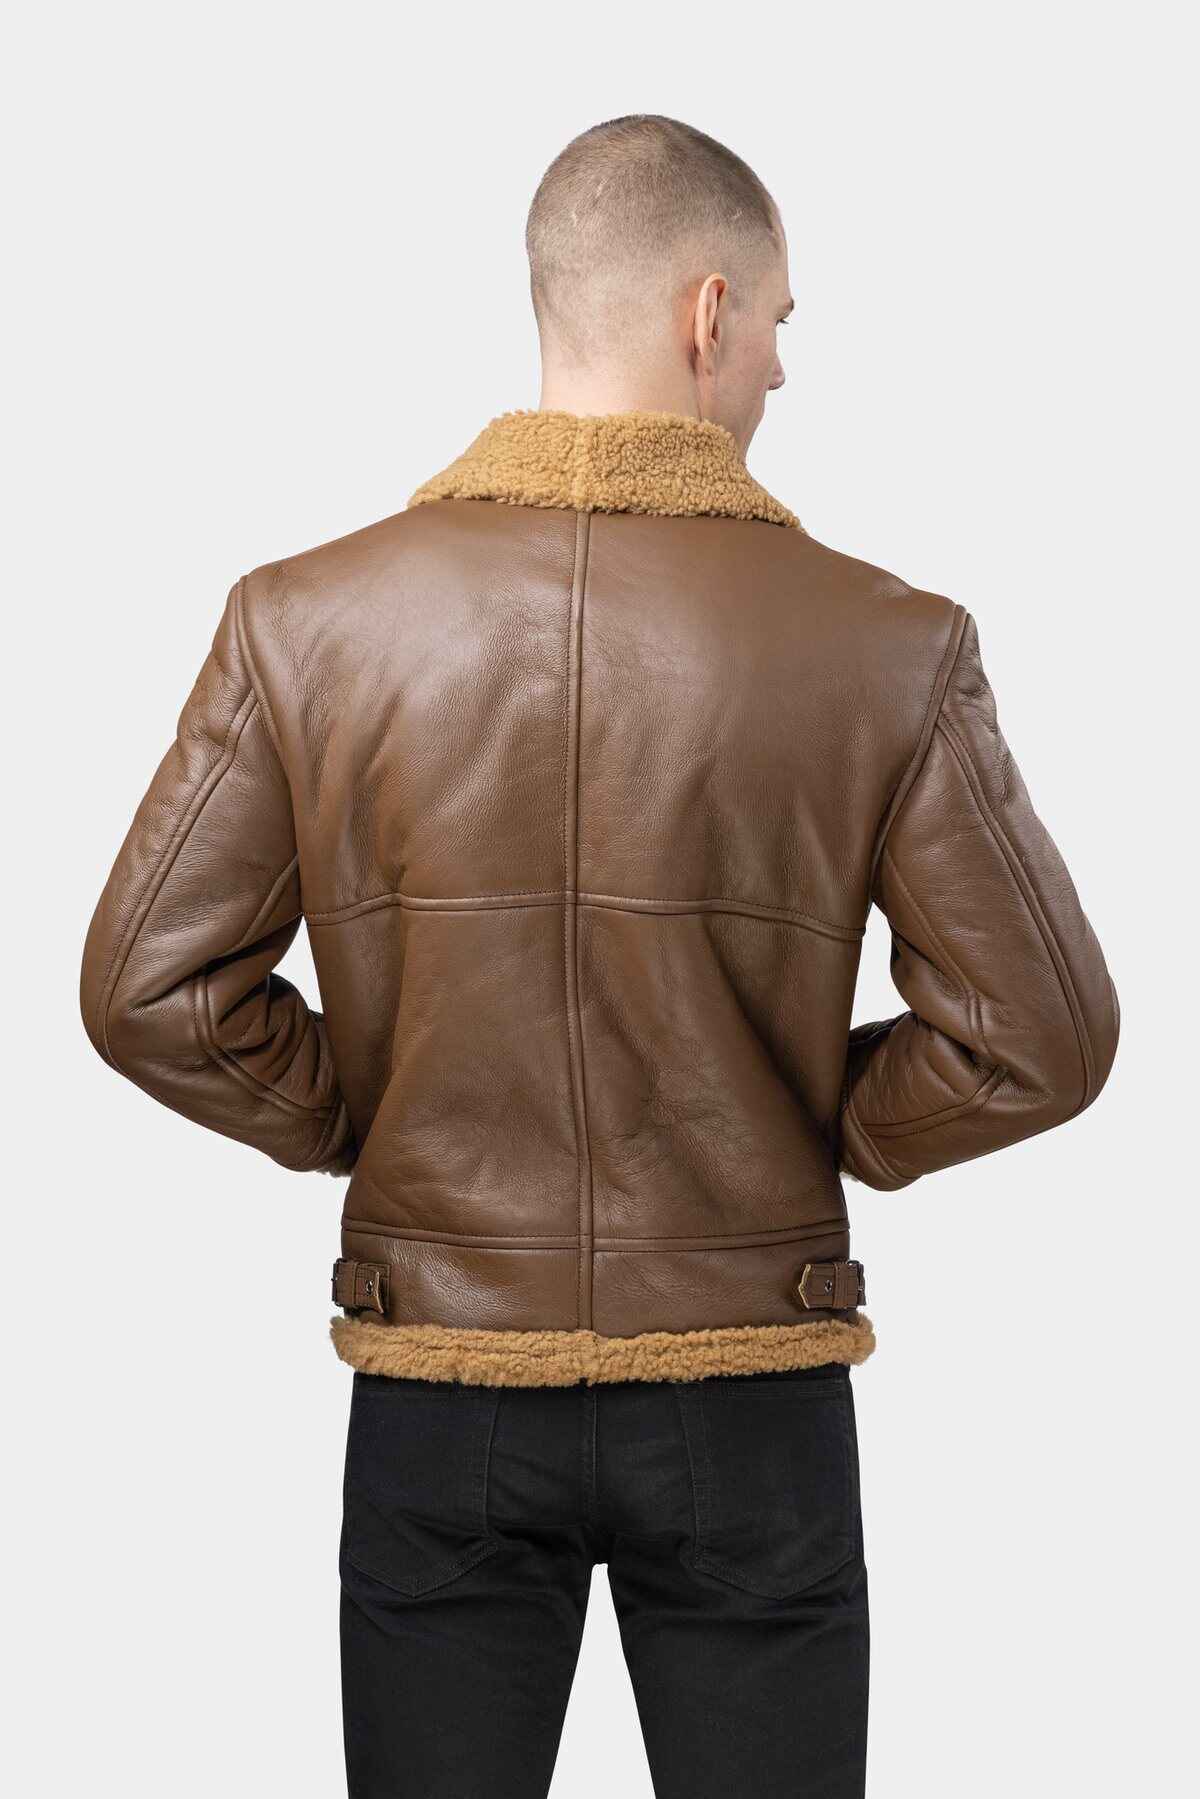 Model wearing Mens Camel Shearling Leather Jacket from the back